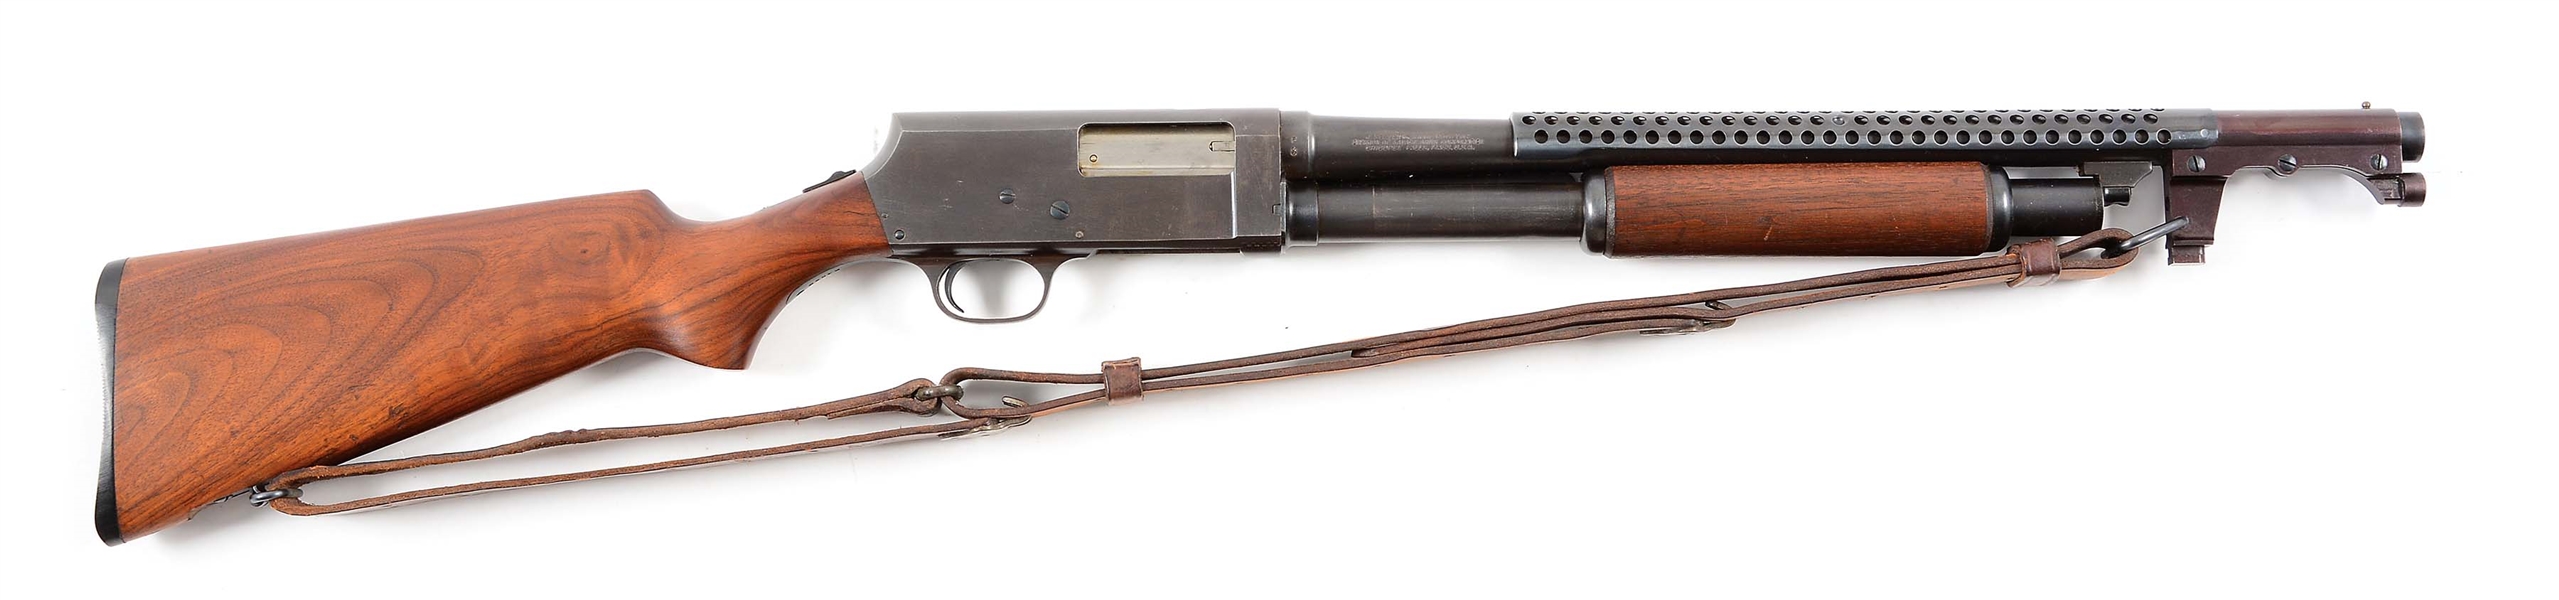 (C) STUNNING WWII STEVENS 520-30 TRENCHGUN WITH SLING.